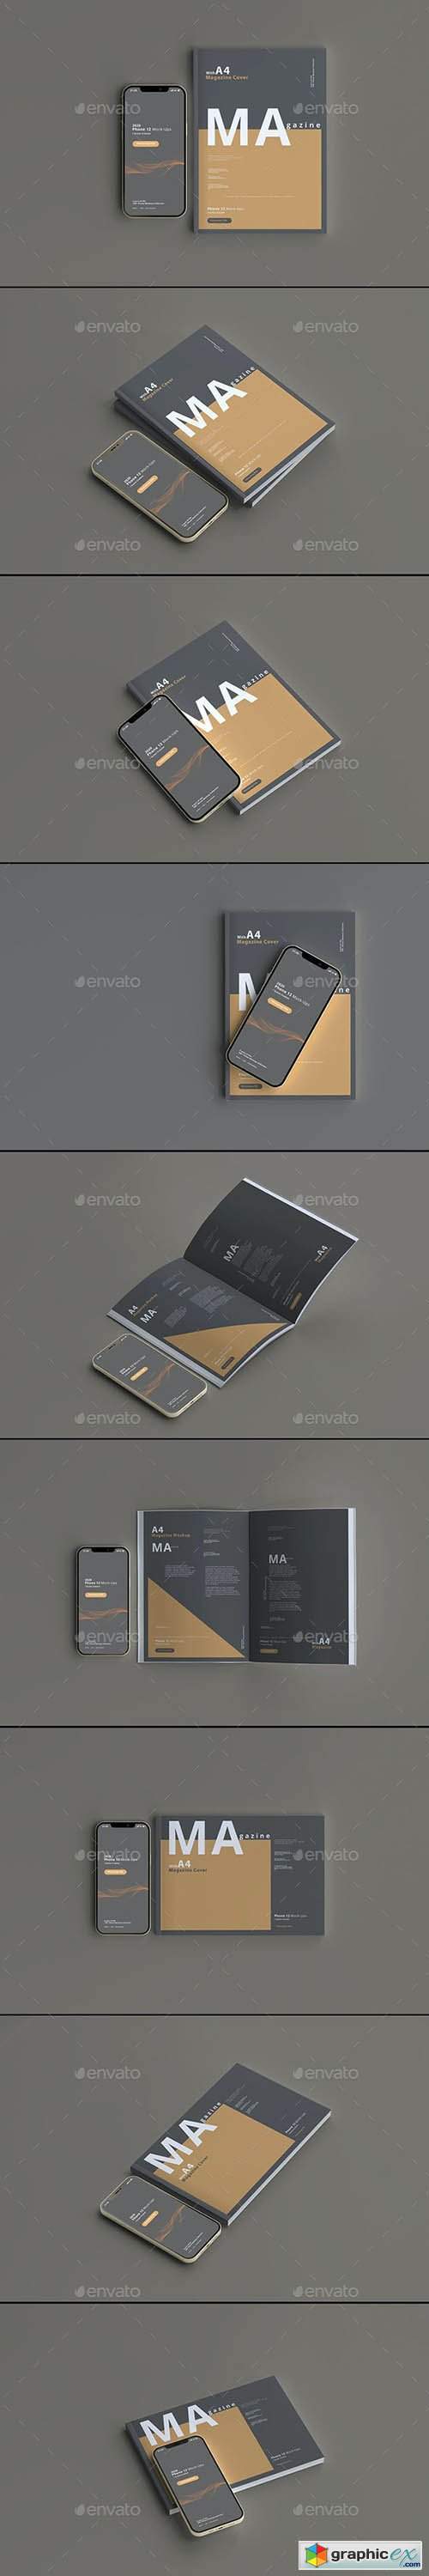 2020 Smart Phone 12 Mockups with Magazine Covers